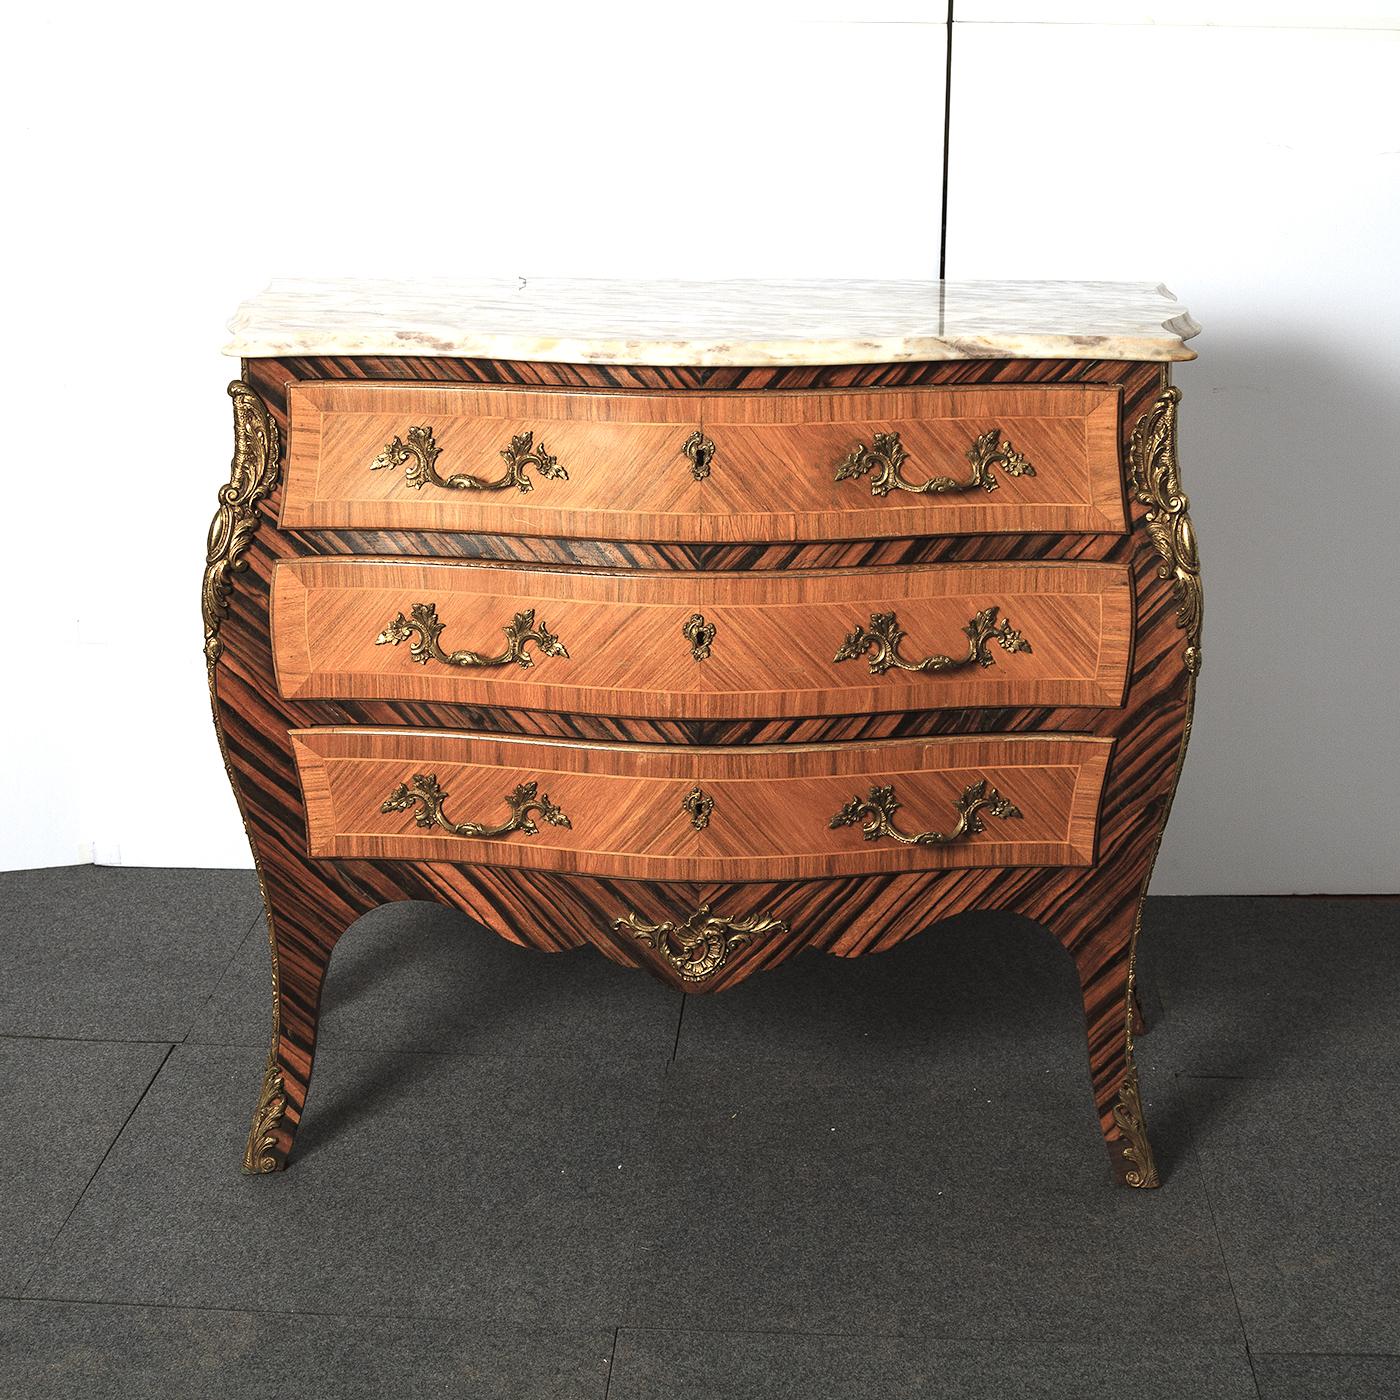 An unusual Pair of French Louis XV style marble top commodes. The serpentine molded edge marble tops above a serpentine and bombay form case with three shaped kingwood and satinwood line inlaid drawers framed by exotic Brazilian Rosewood. Having